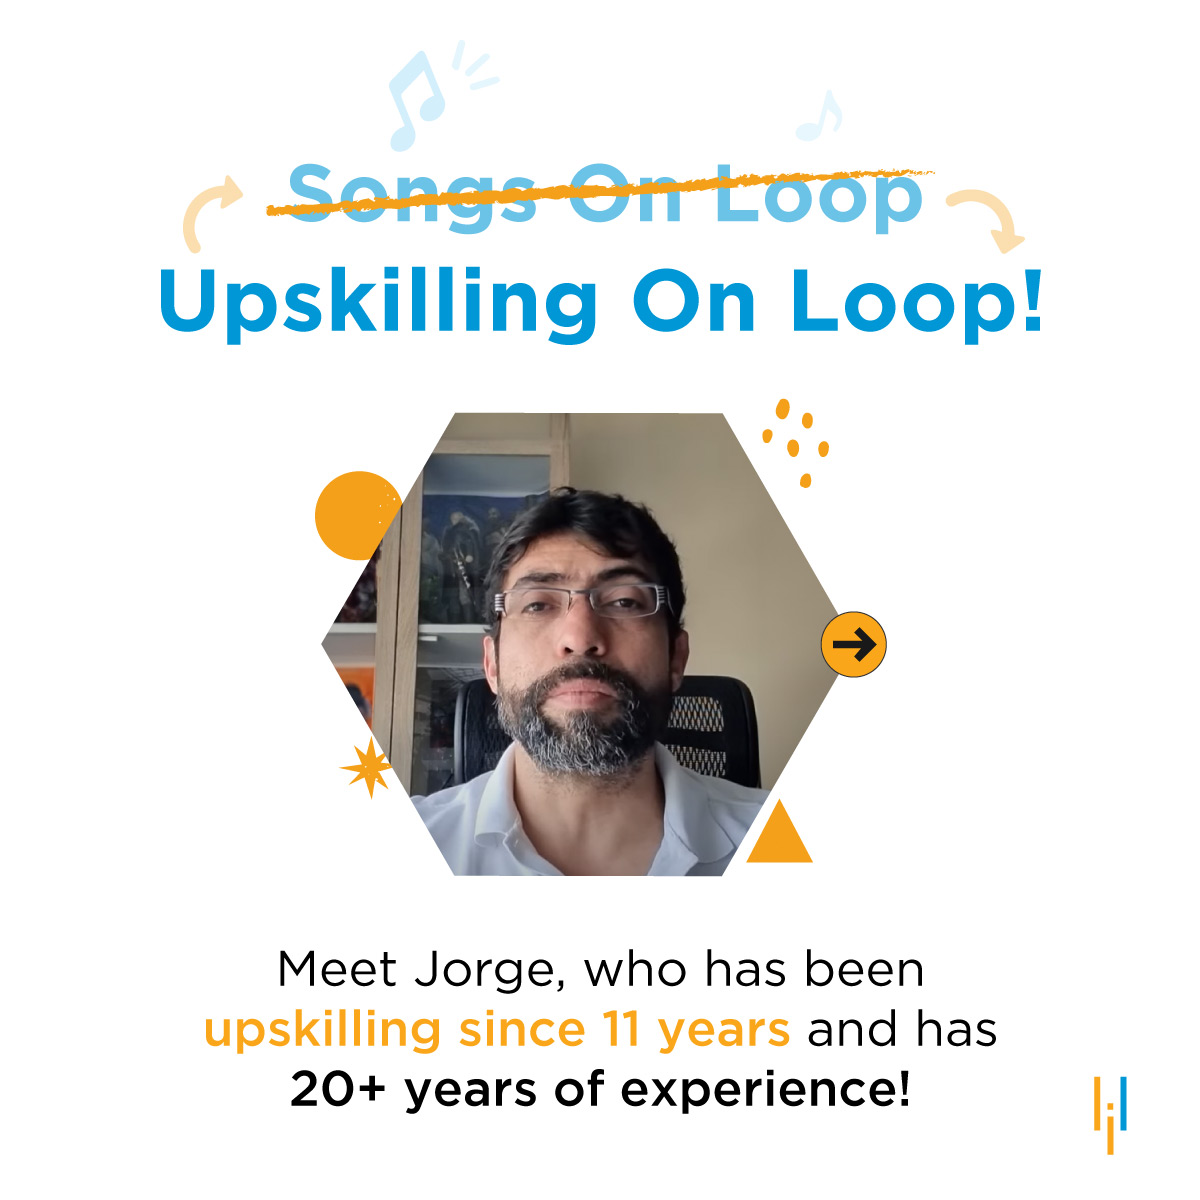 Jorge can safely be called the collector of skills and knowledge and his 11 year track record of continuous upskilling testifies this. He’s been a serial upskiller, and after each upskilling sprint, he’s has achieved some kind of forward momentum or breakthroughs in his career.